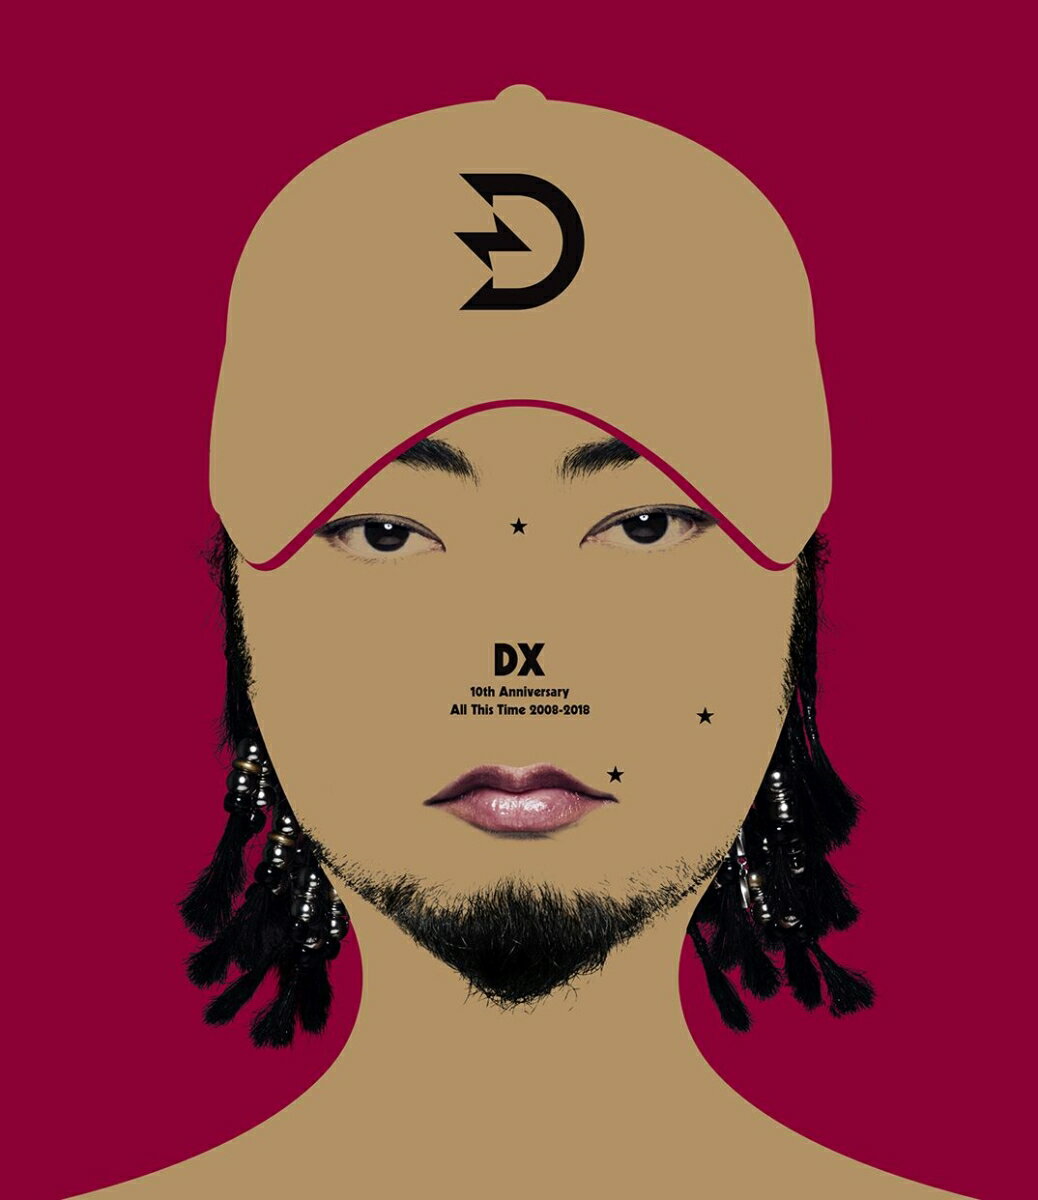 DX - 10th Anniversary All This Time 2008-2018 (初回限定盤) [ Diggy-MO' ]